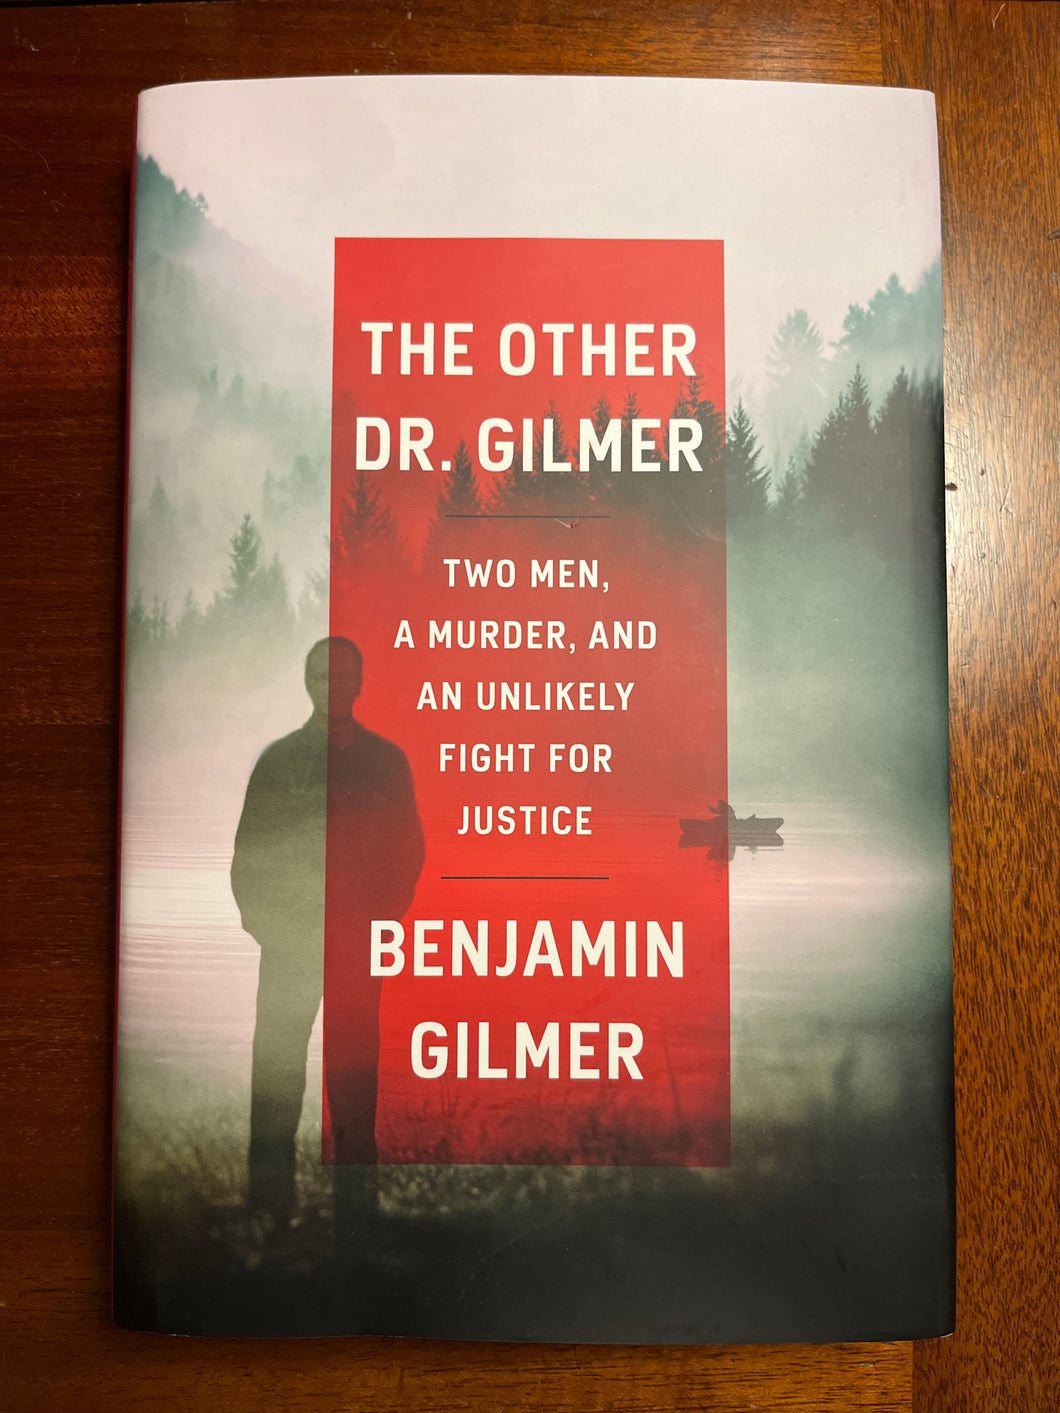 The Other Dr. Gilmer: Two Men, A Murder, And An Unlikely Fight For Justice